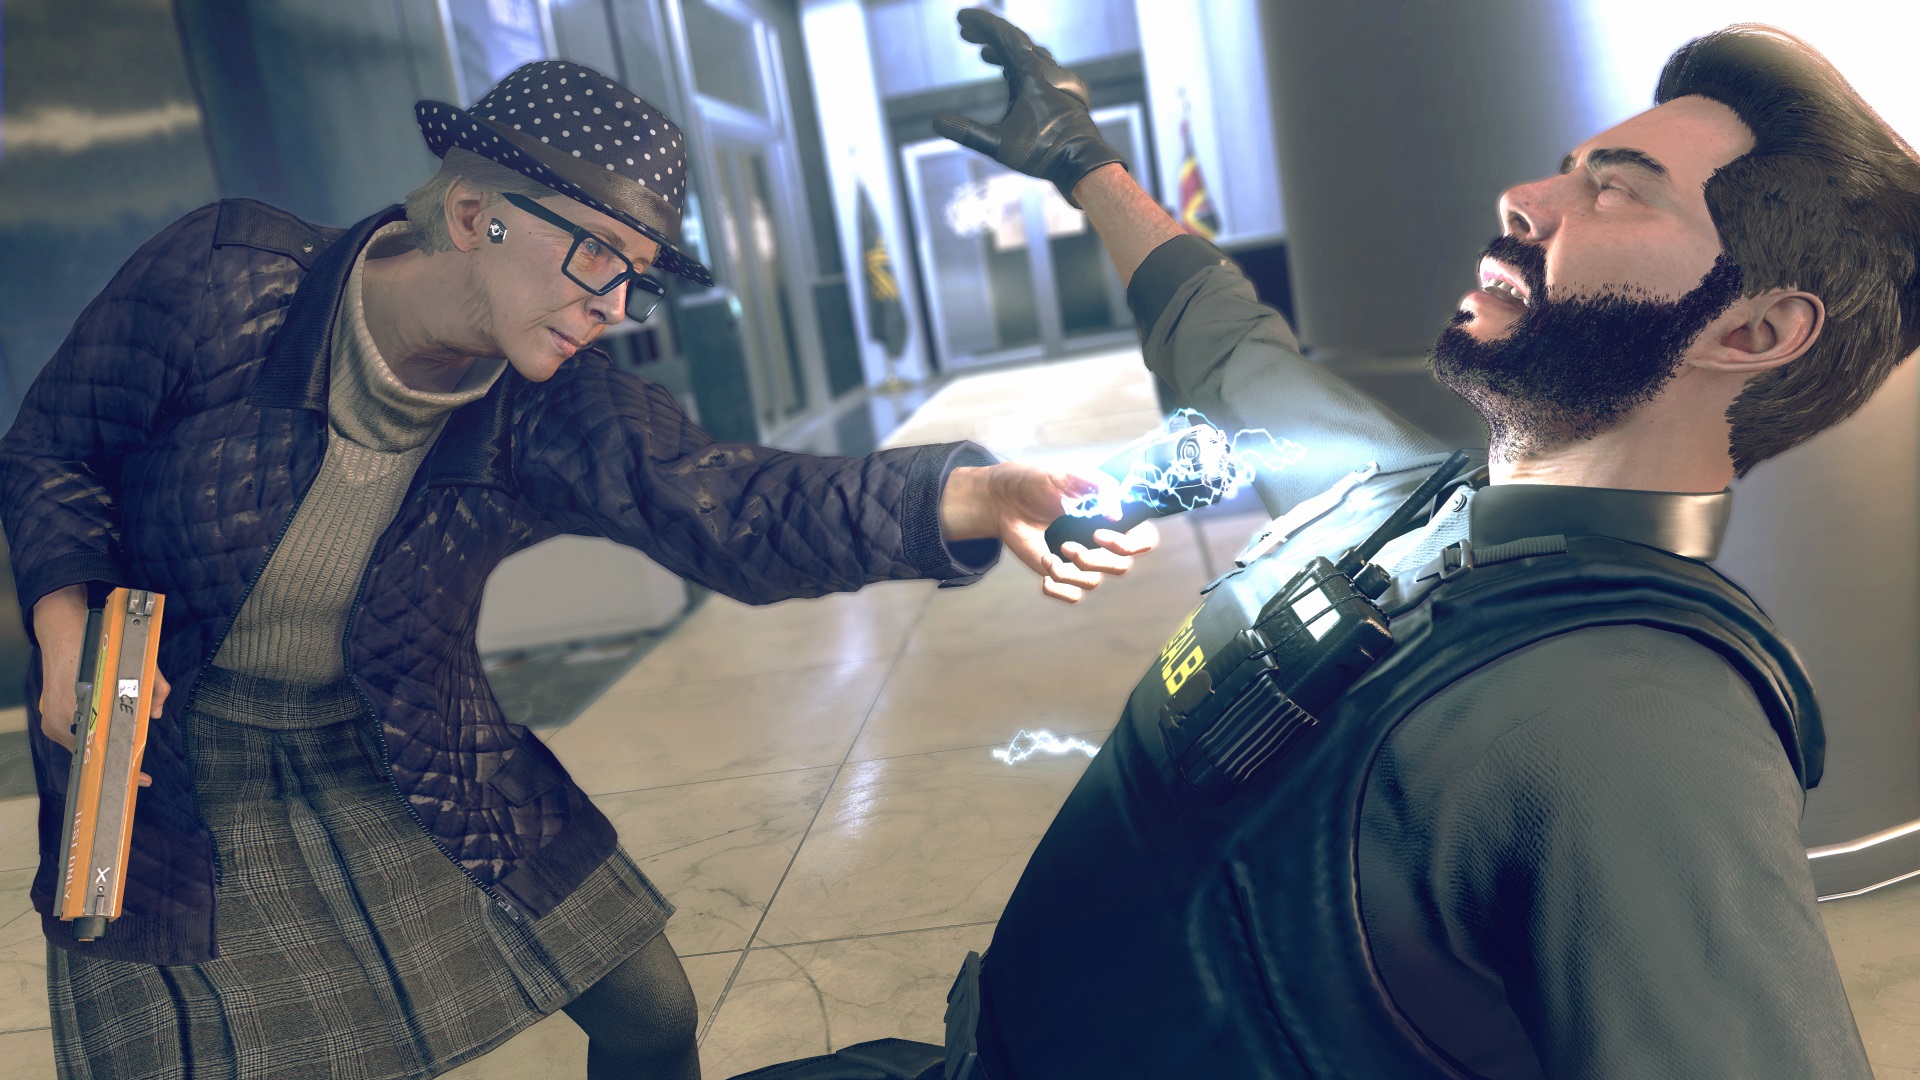 watch dogs characters